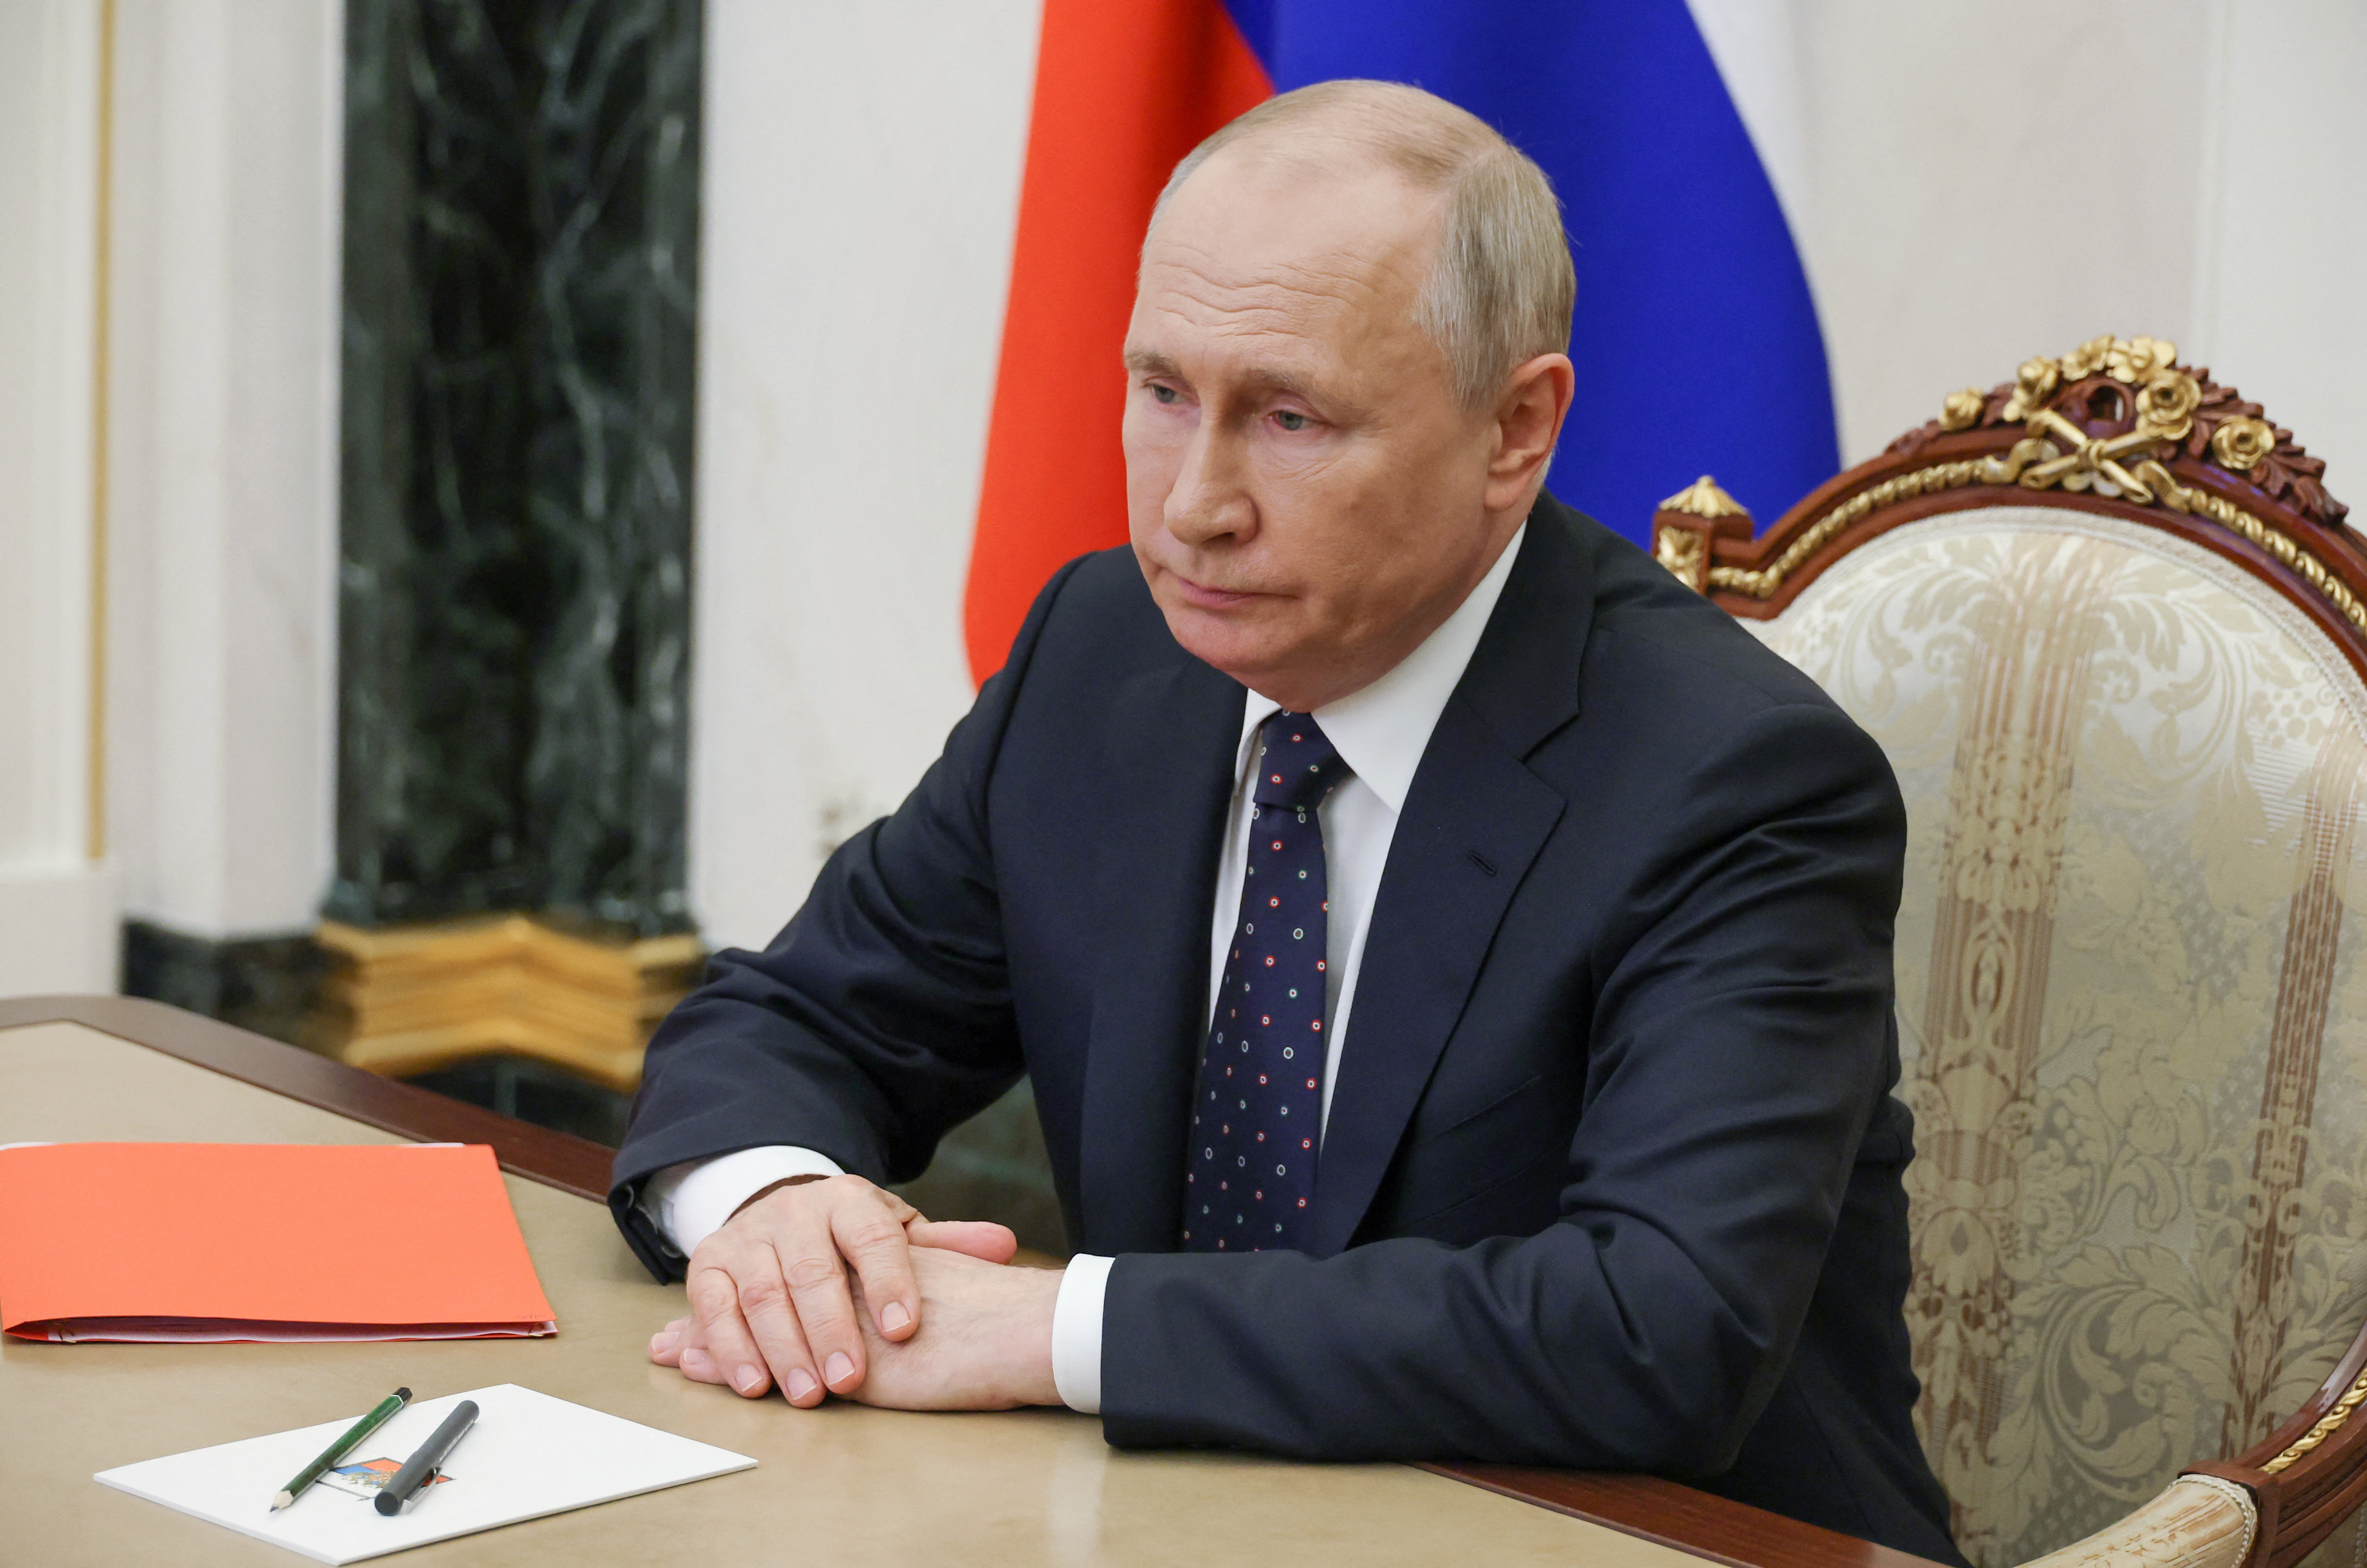 Russian President Putin chairs a Security Council meeting in Moscow